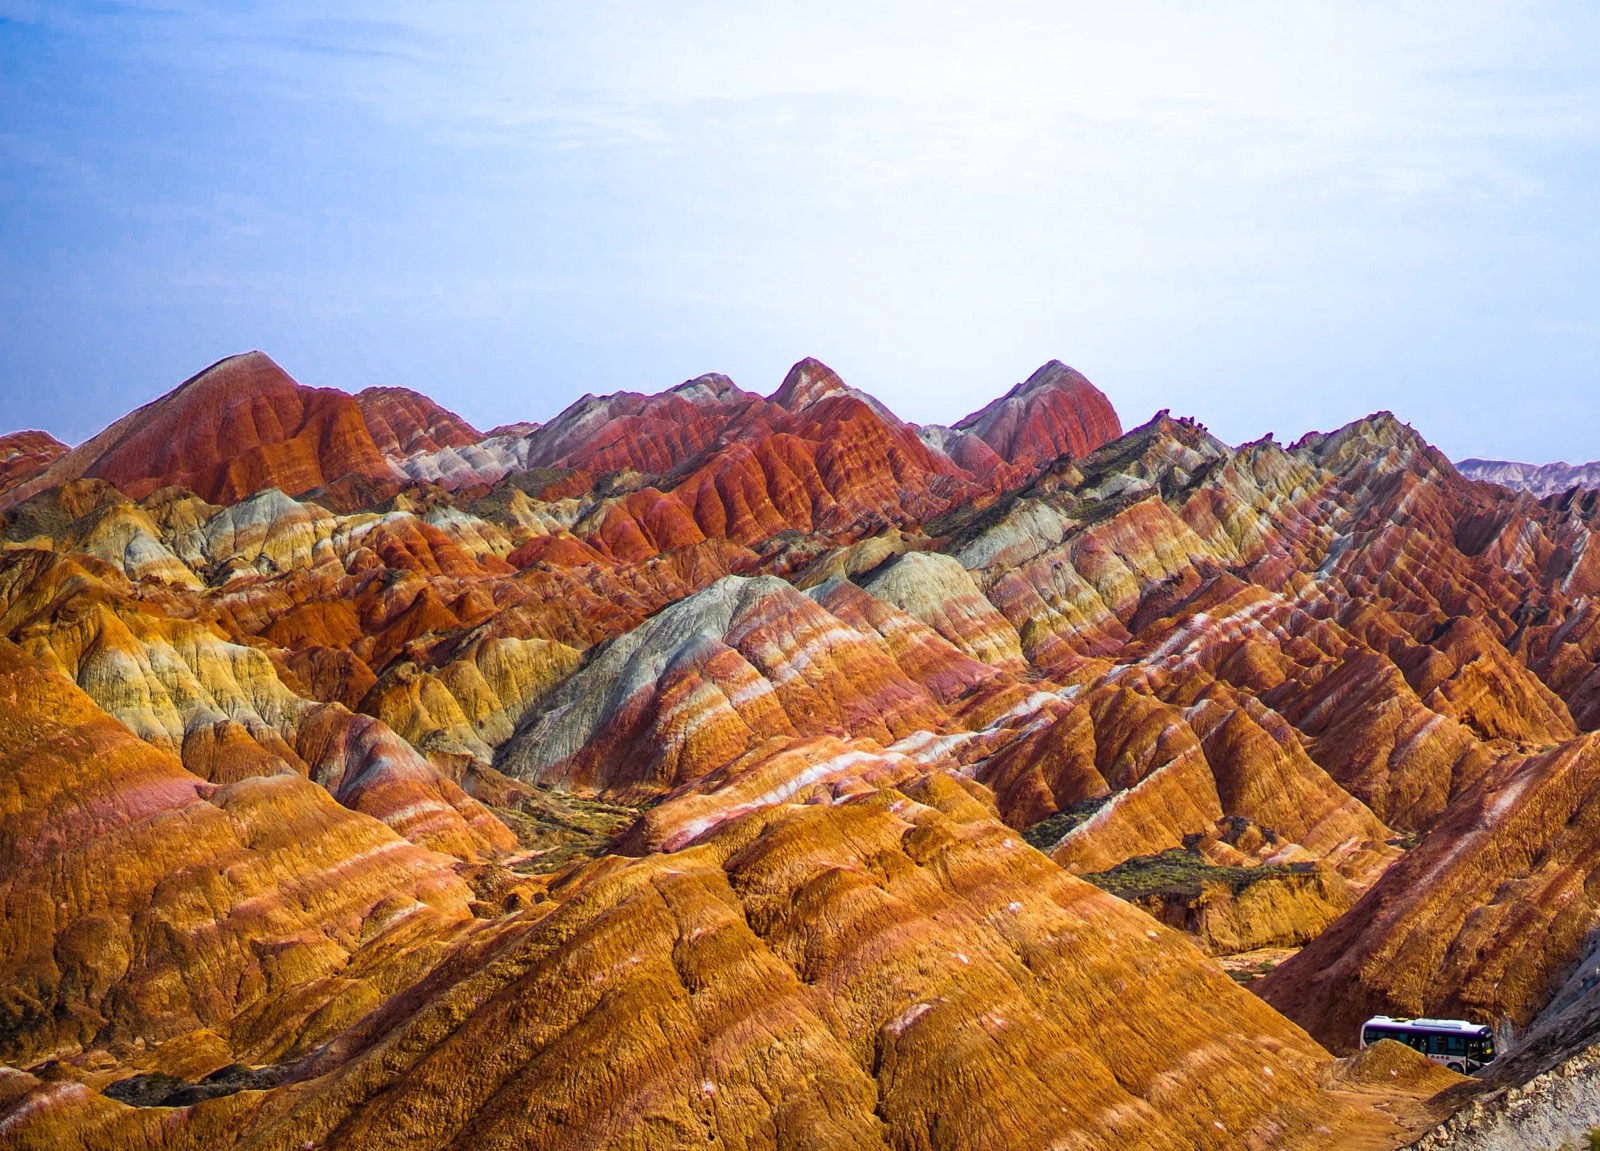 Can You Match These Extraordinary Natural Features to Their Respective Countries? Zhangye Danxia National Geological Park, China